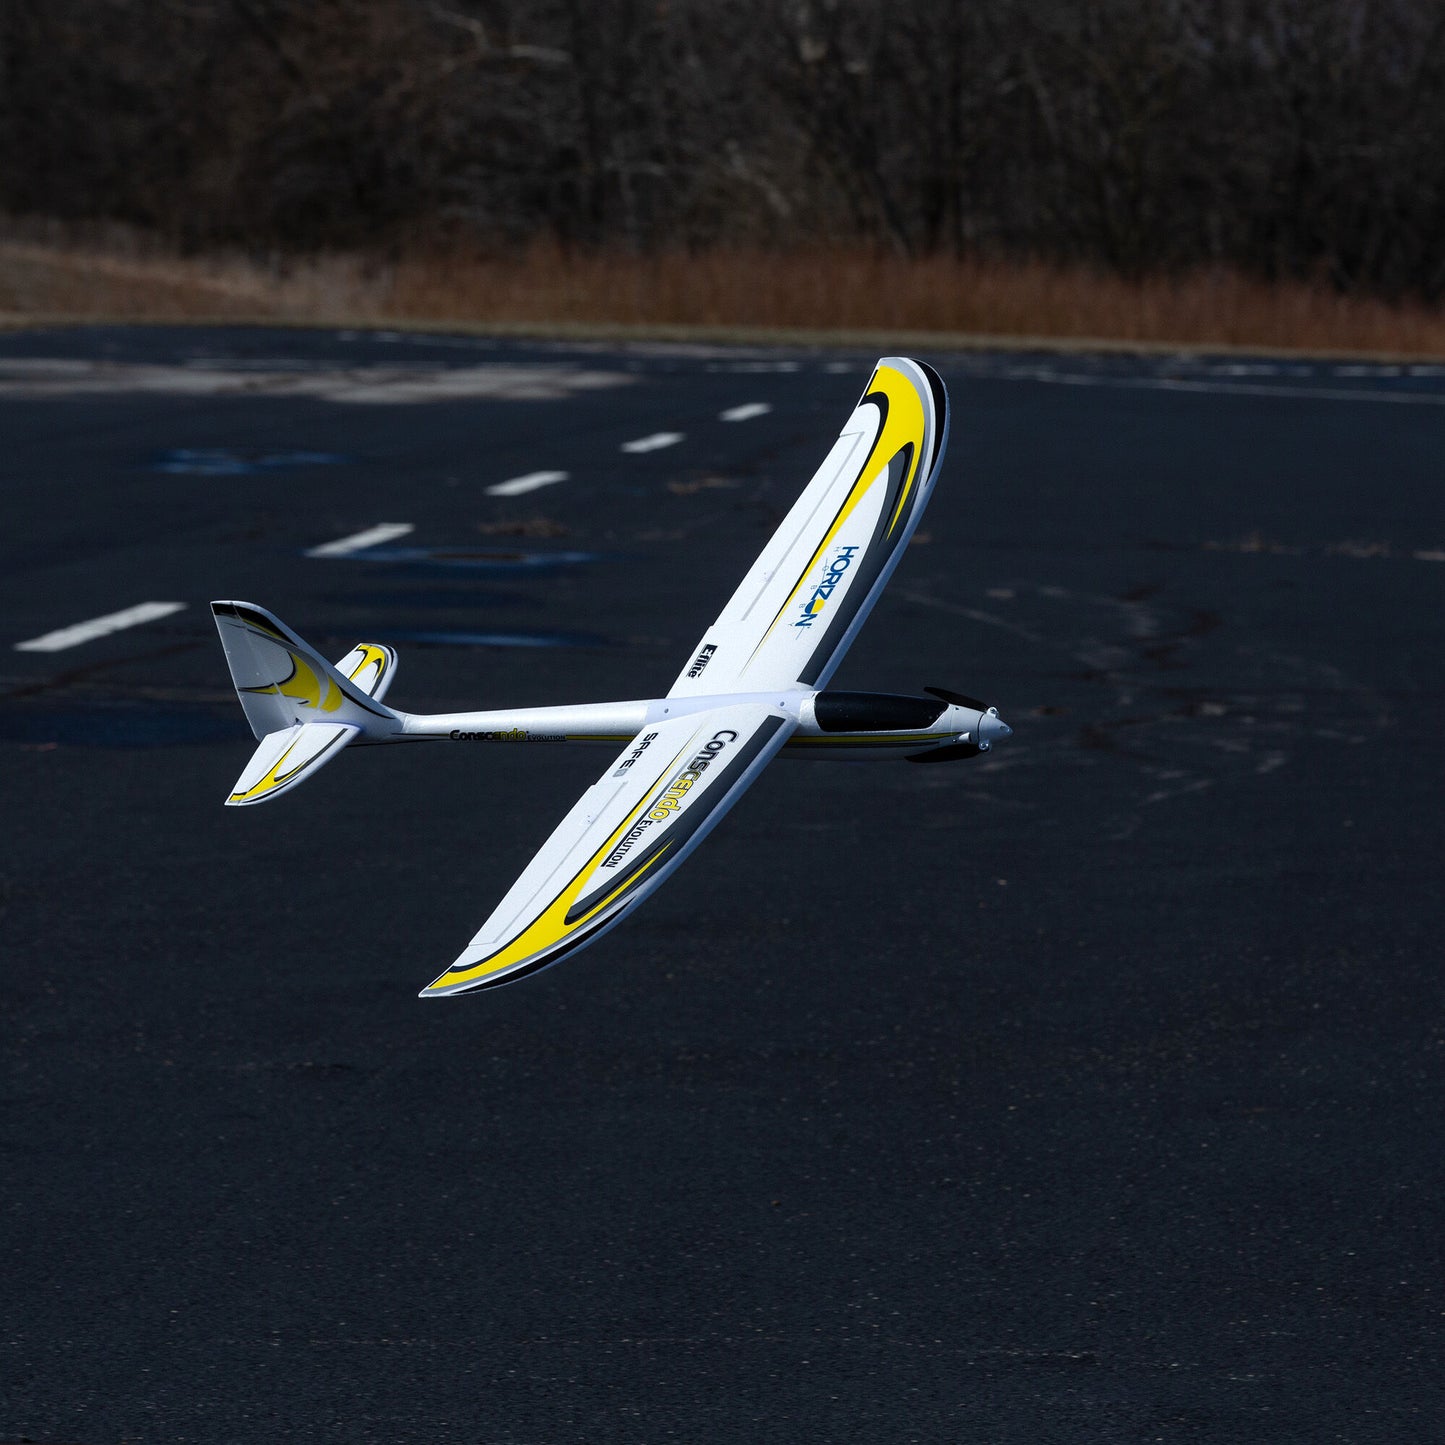 E-Flite Conscendo Evolution 1.5m BNF Basic with AS3X and SAFE Select